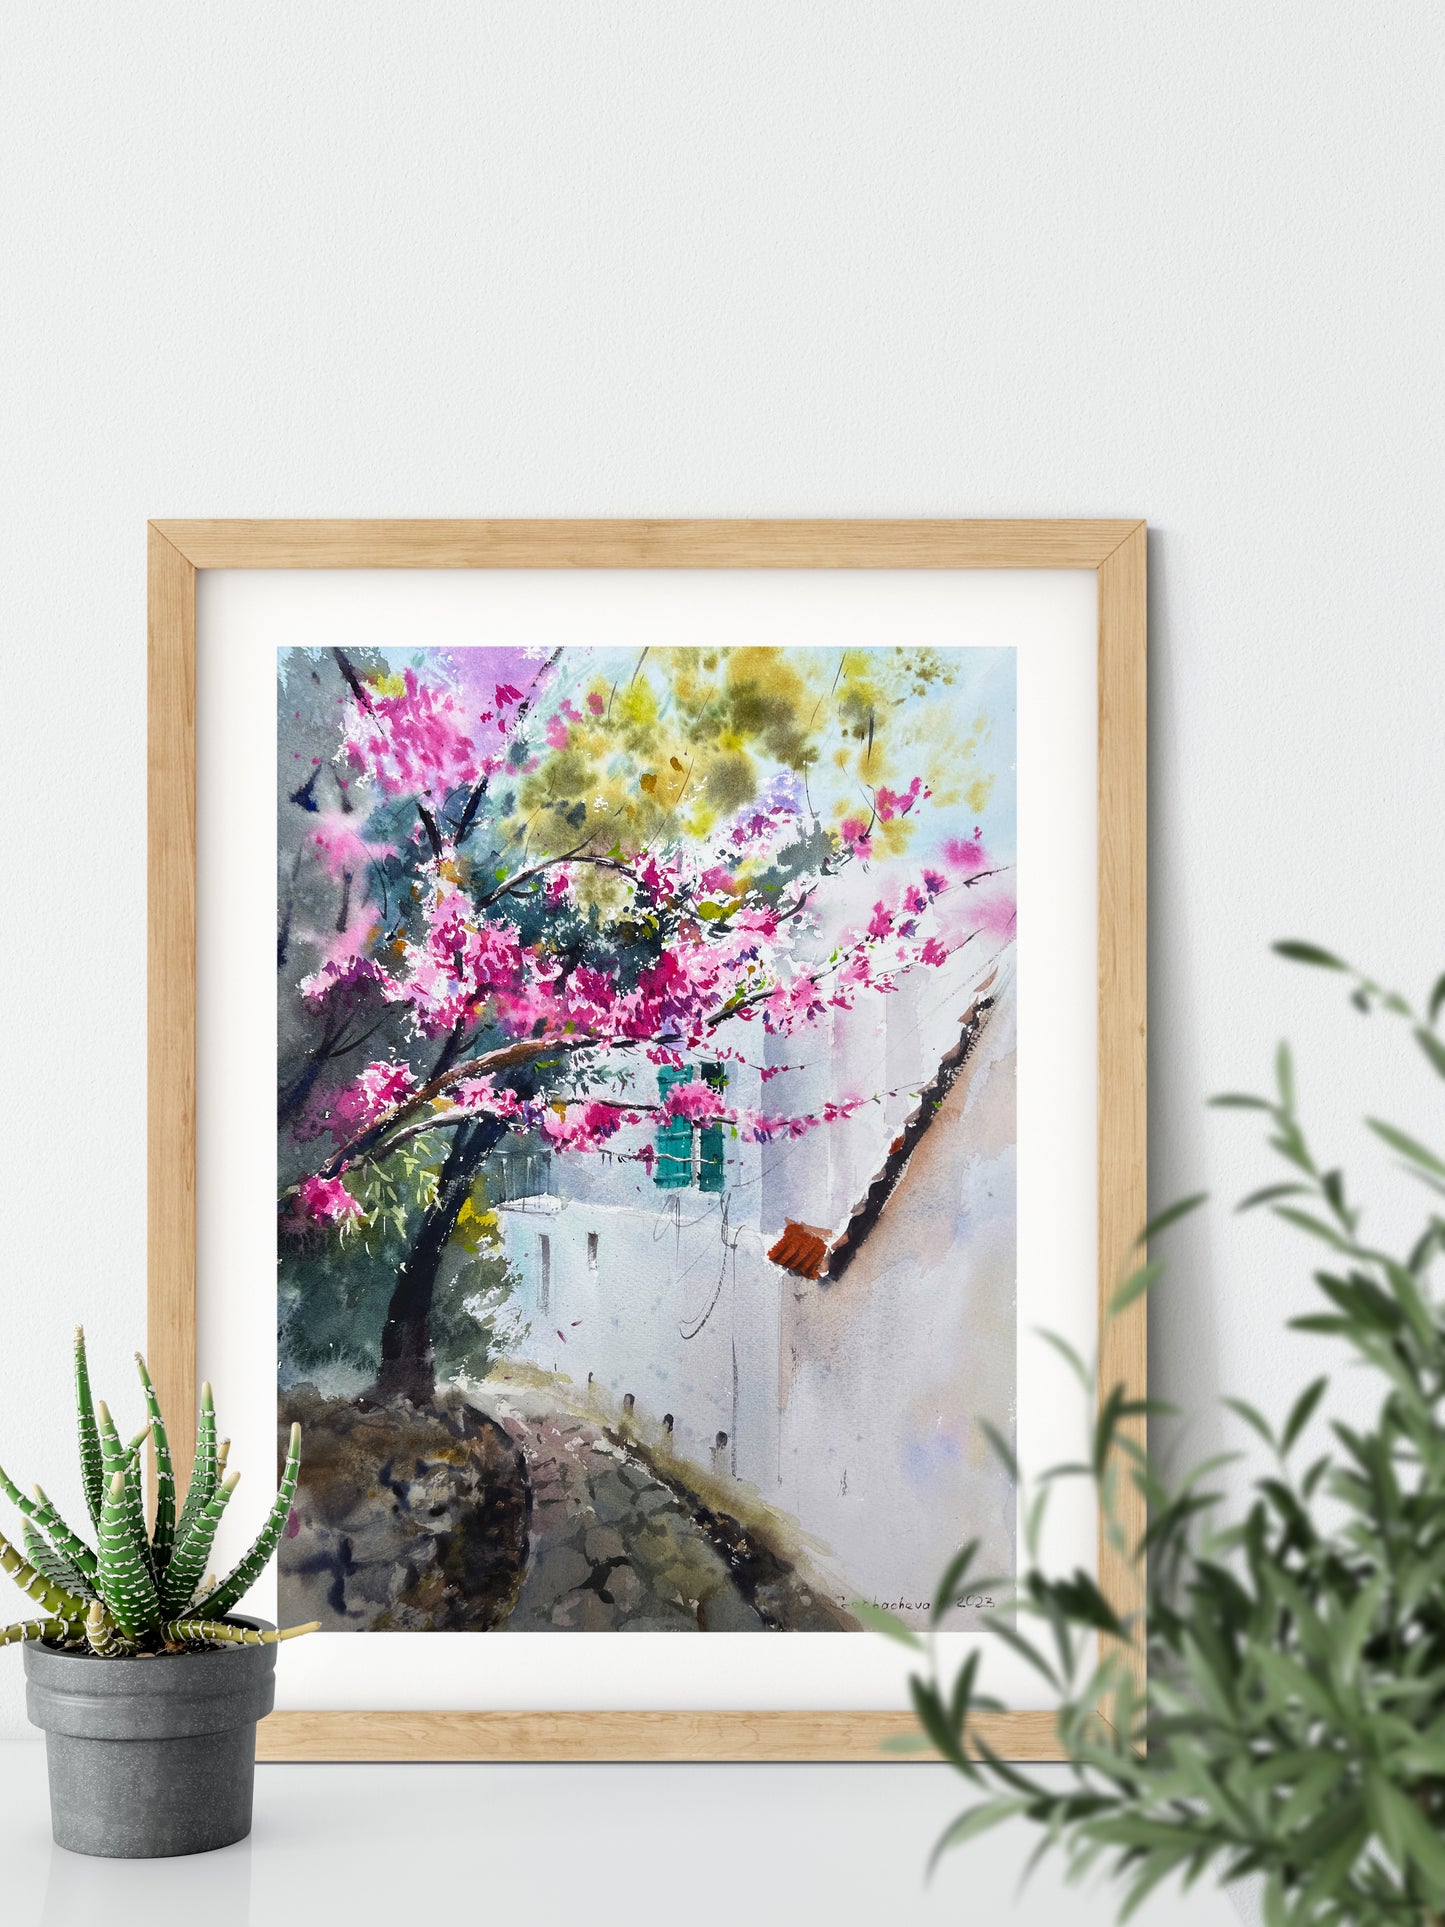 Cyprus Watercolor Painting, Original Artwork, Coastal Art Decor, Cercis Flowers, Cyprus Cityscape, Gift For Home